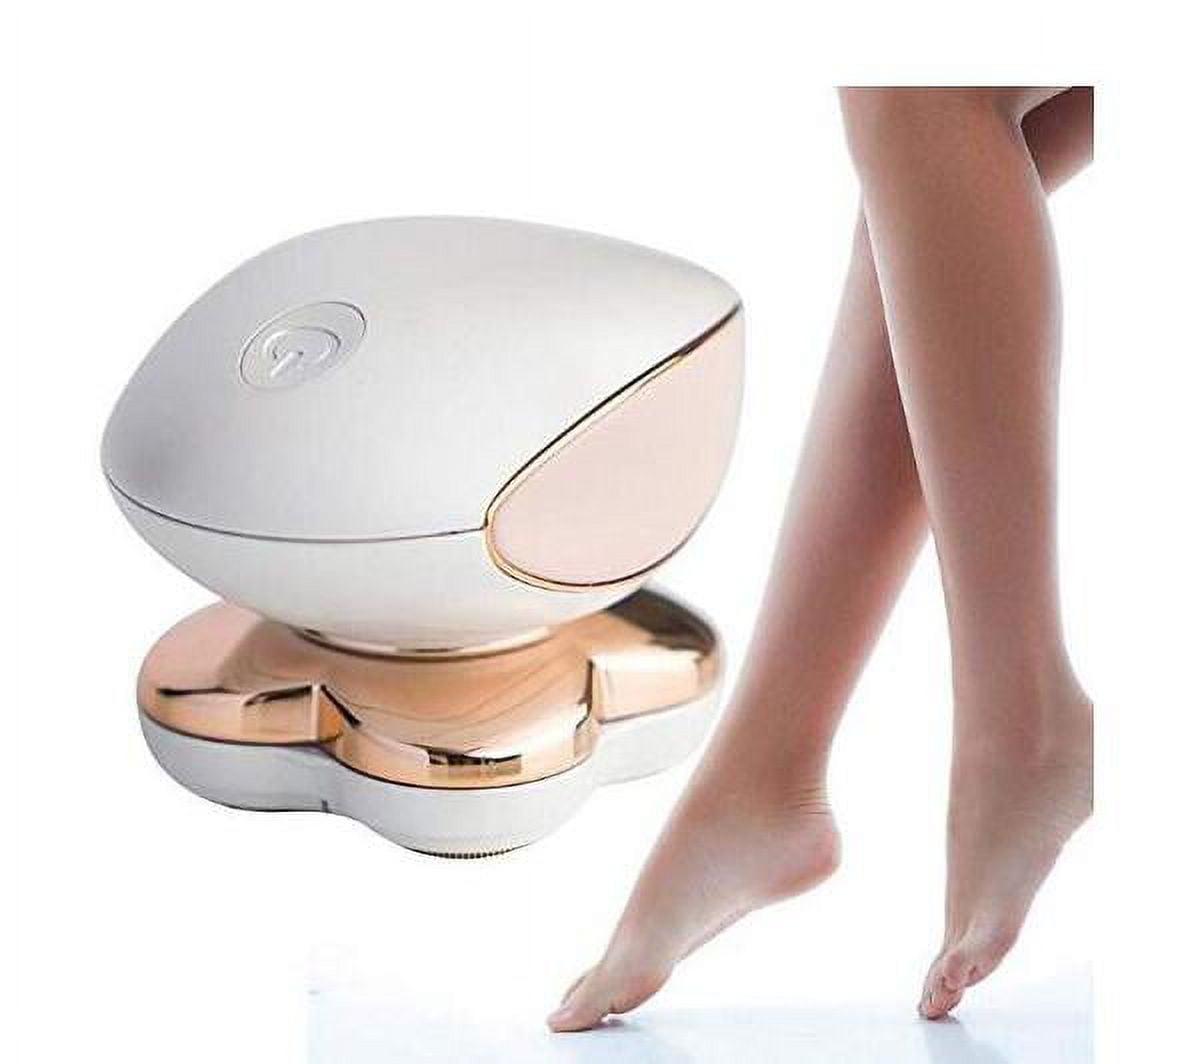 Finishing Touch Flawless Legs Review: Leg Hair Removal - Freakin